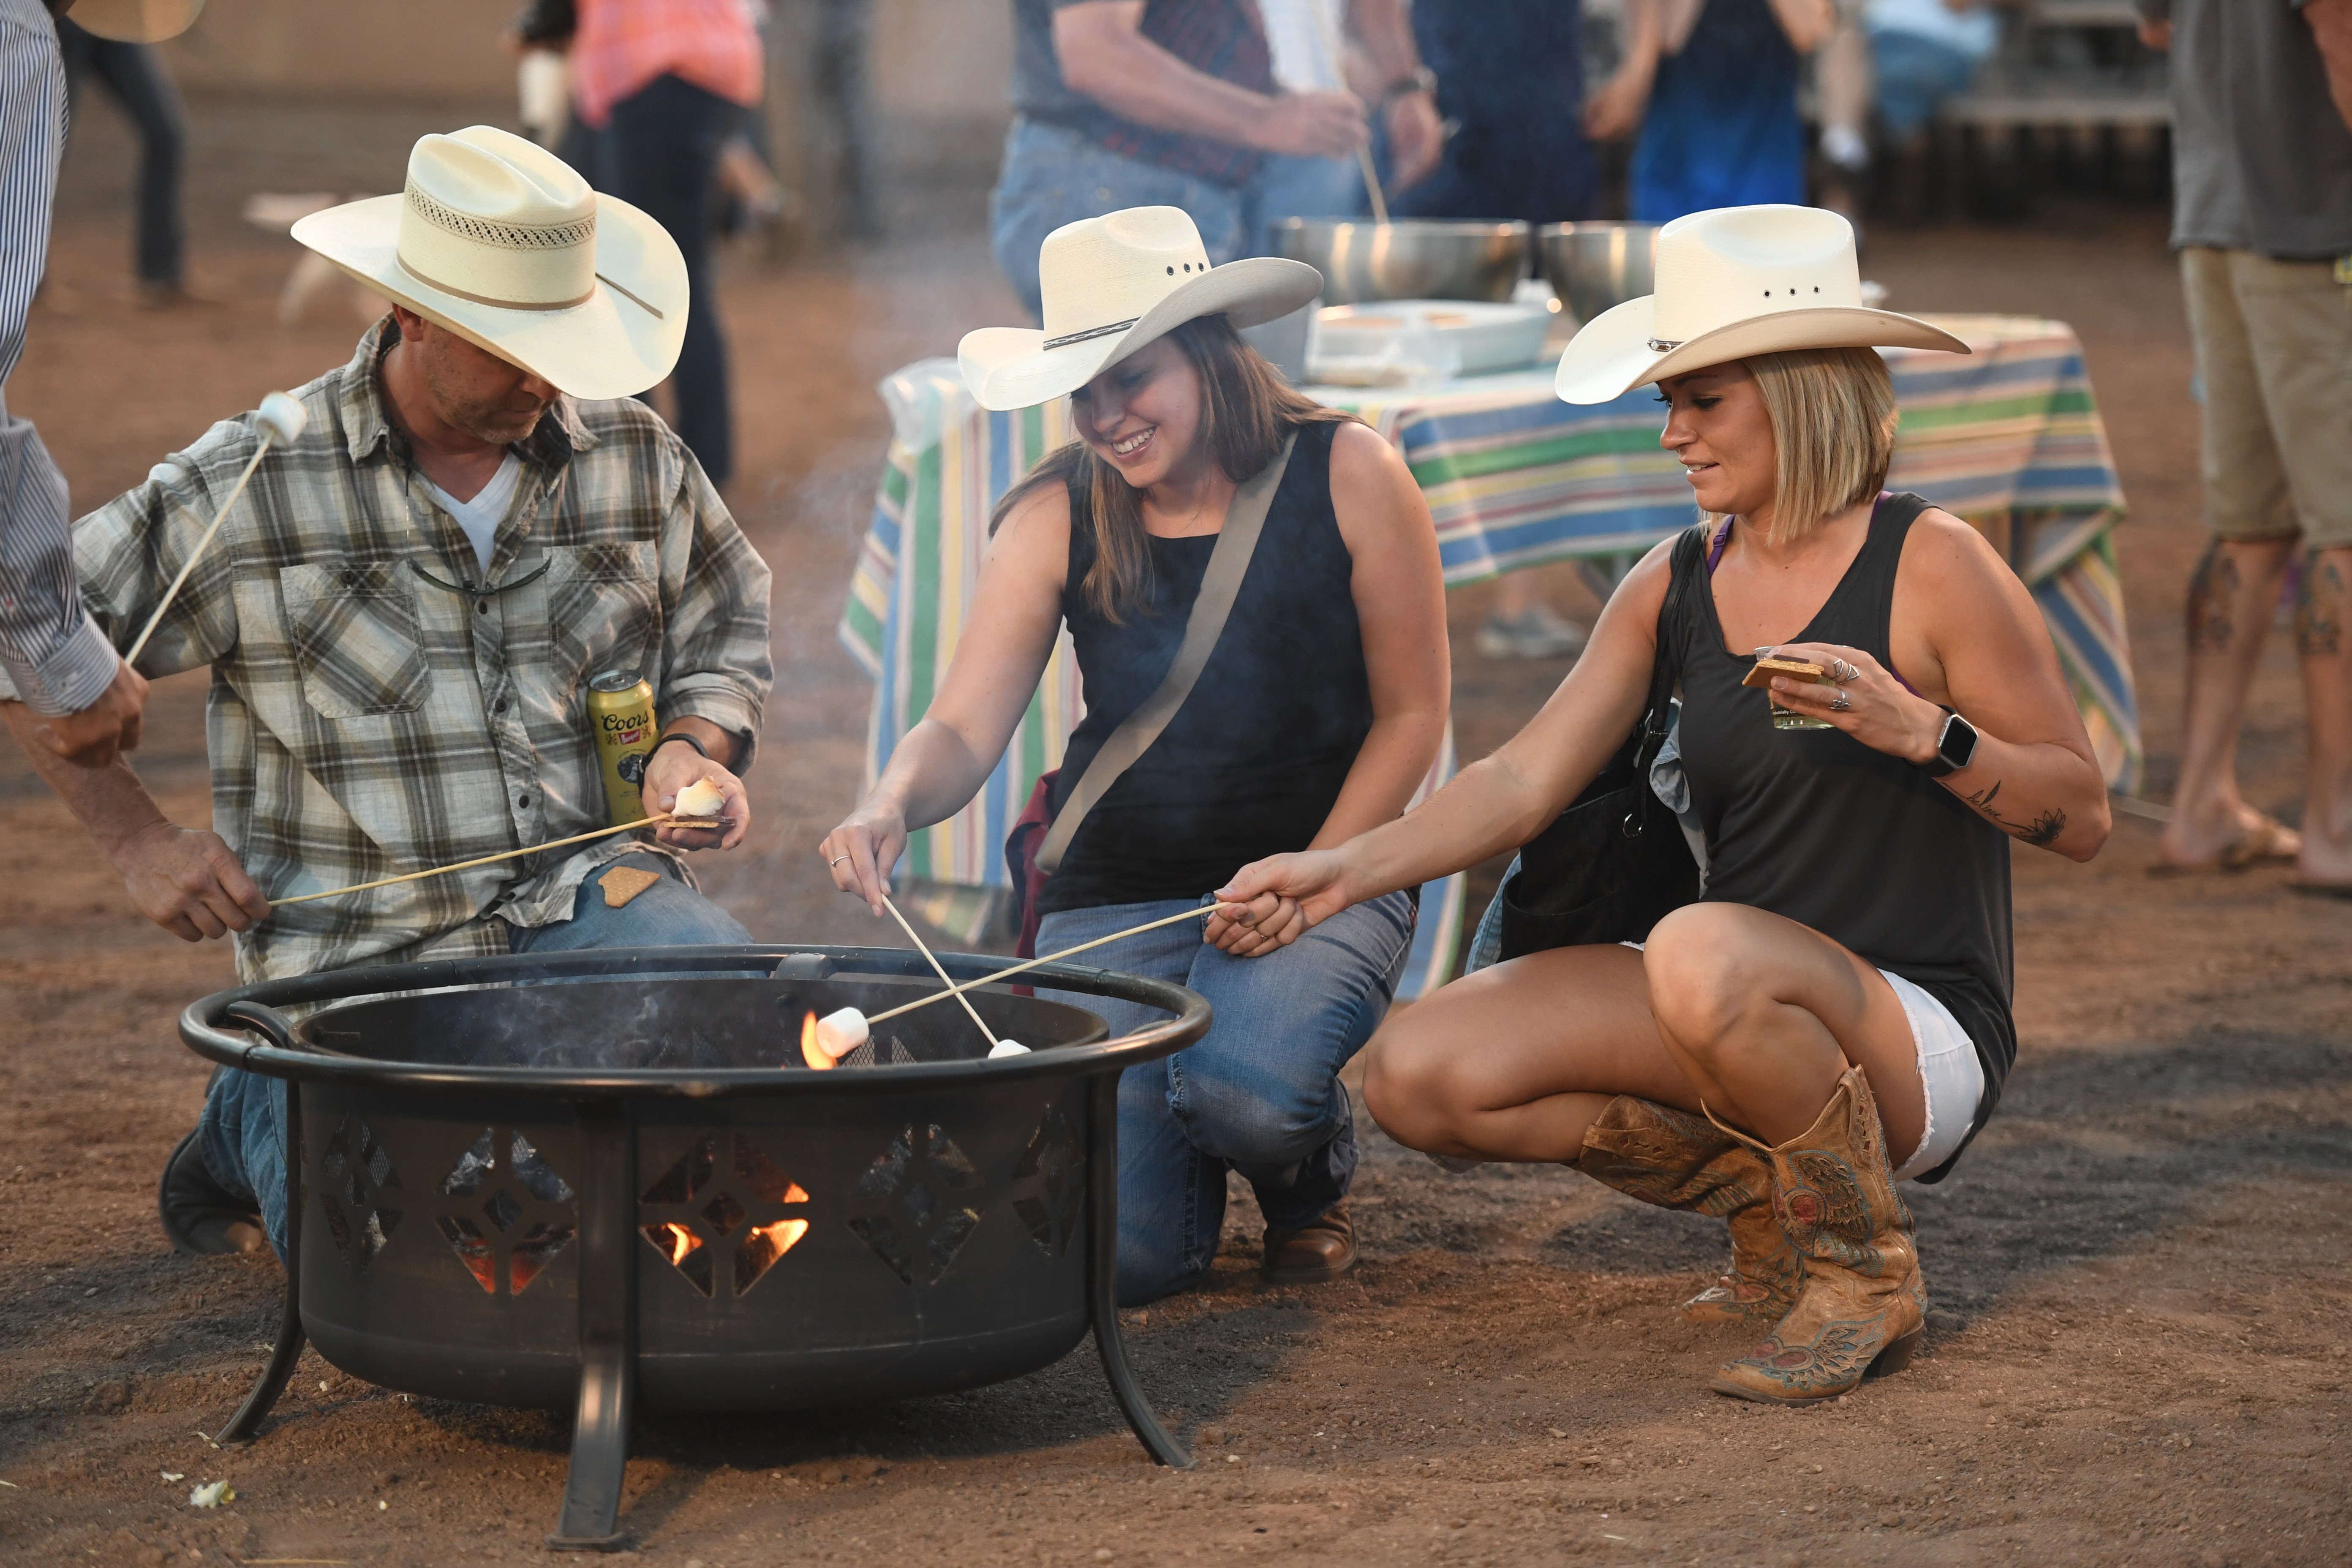 The fourth COS Rodeo of the summer took place Wednesday, July 6, 2016 at the Norris-Penrose Event Center. The event resumes for four consecutive Wednesday nights at 5pm beginning July 27th. Tickets art $34 and include dinner, rodeo and a concert. Visitors can even participate in certain selected events. Photo by Mark Reis, The Gazette